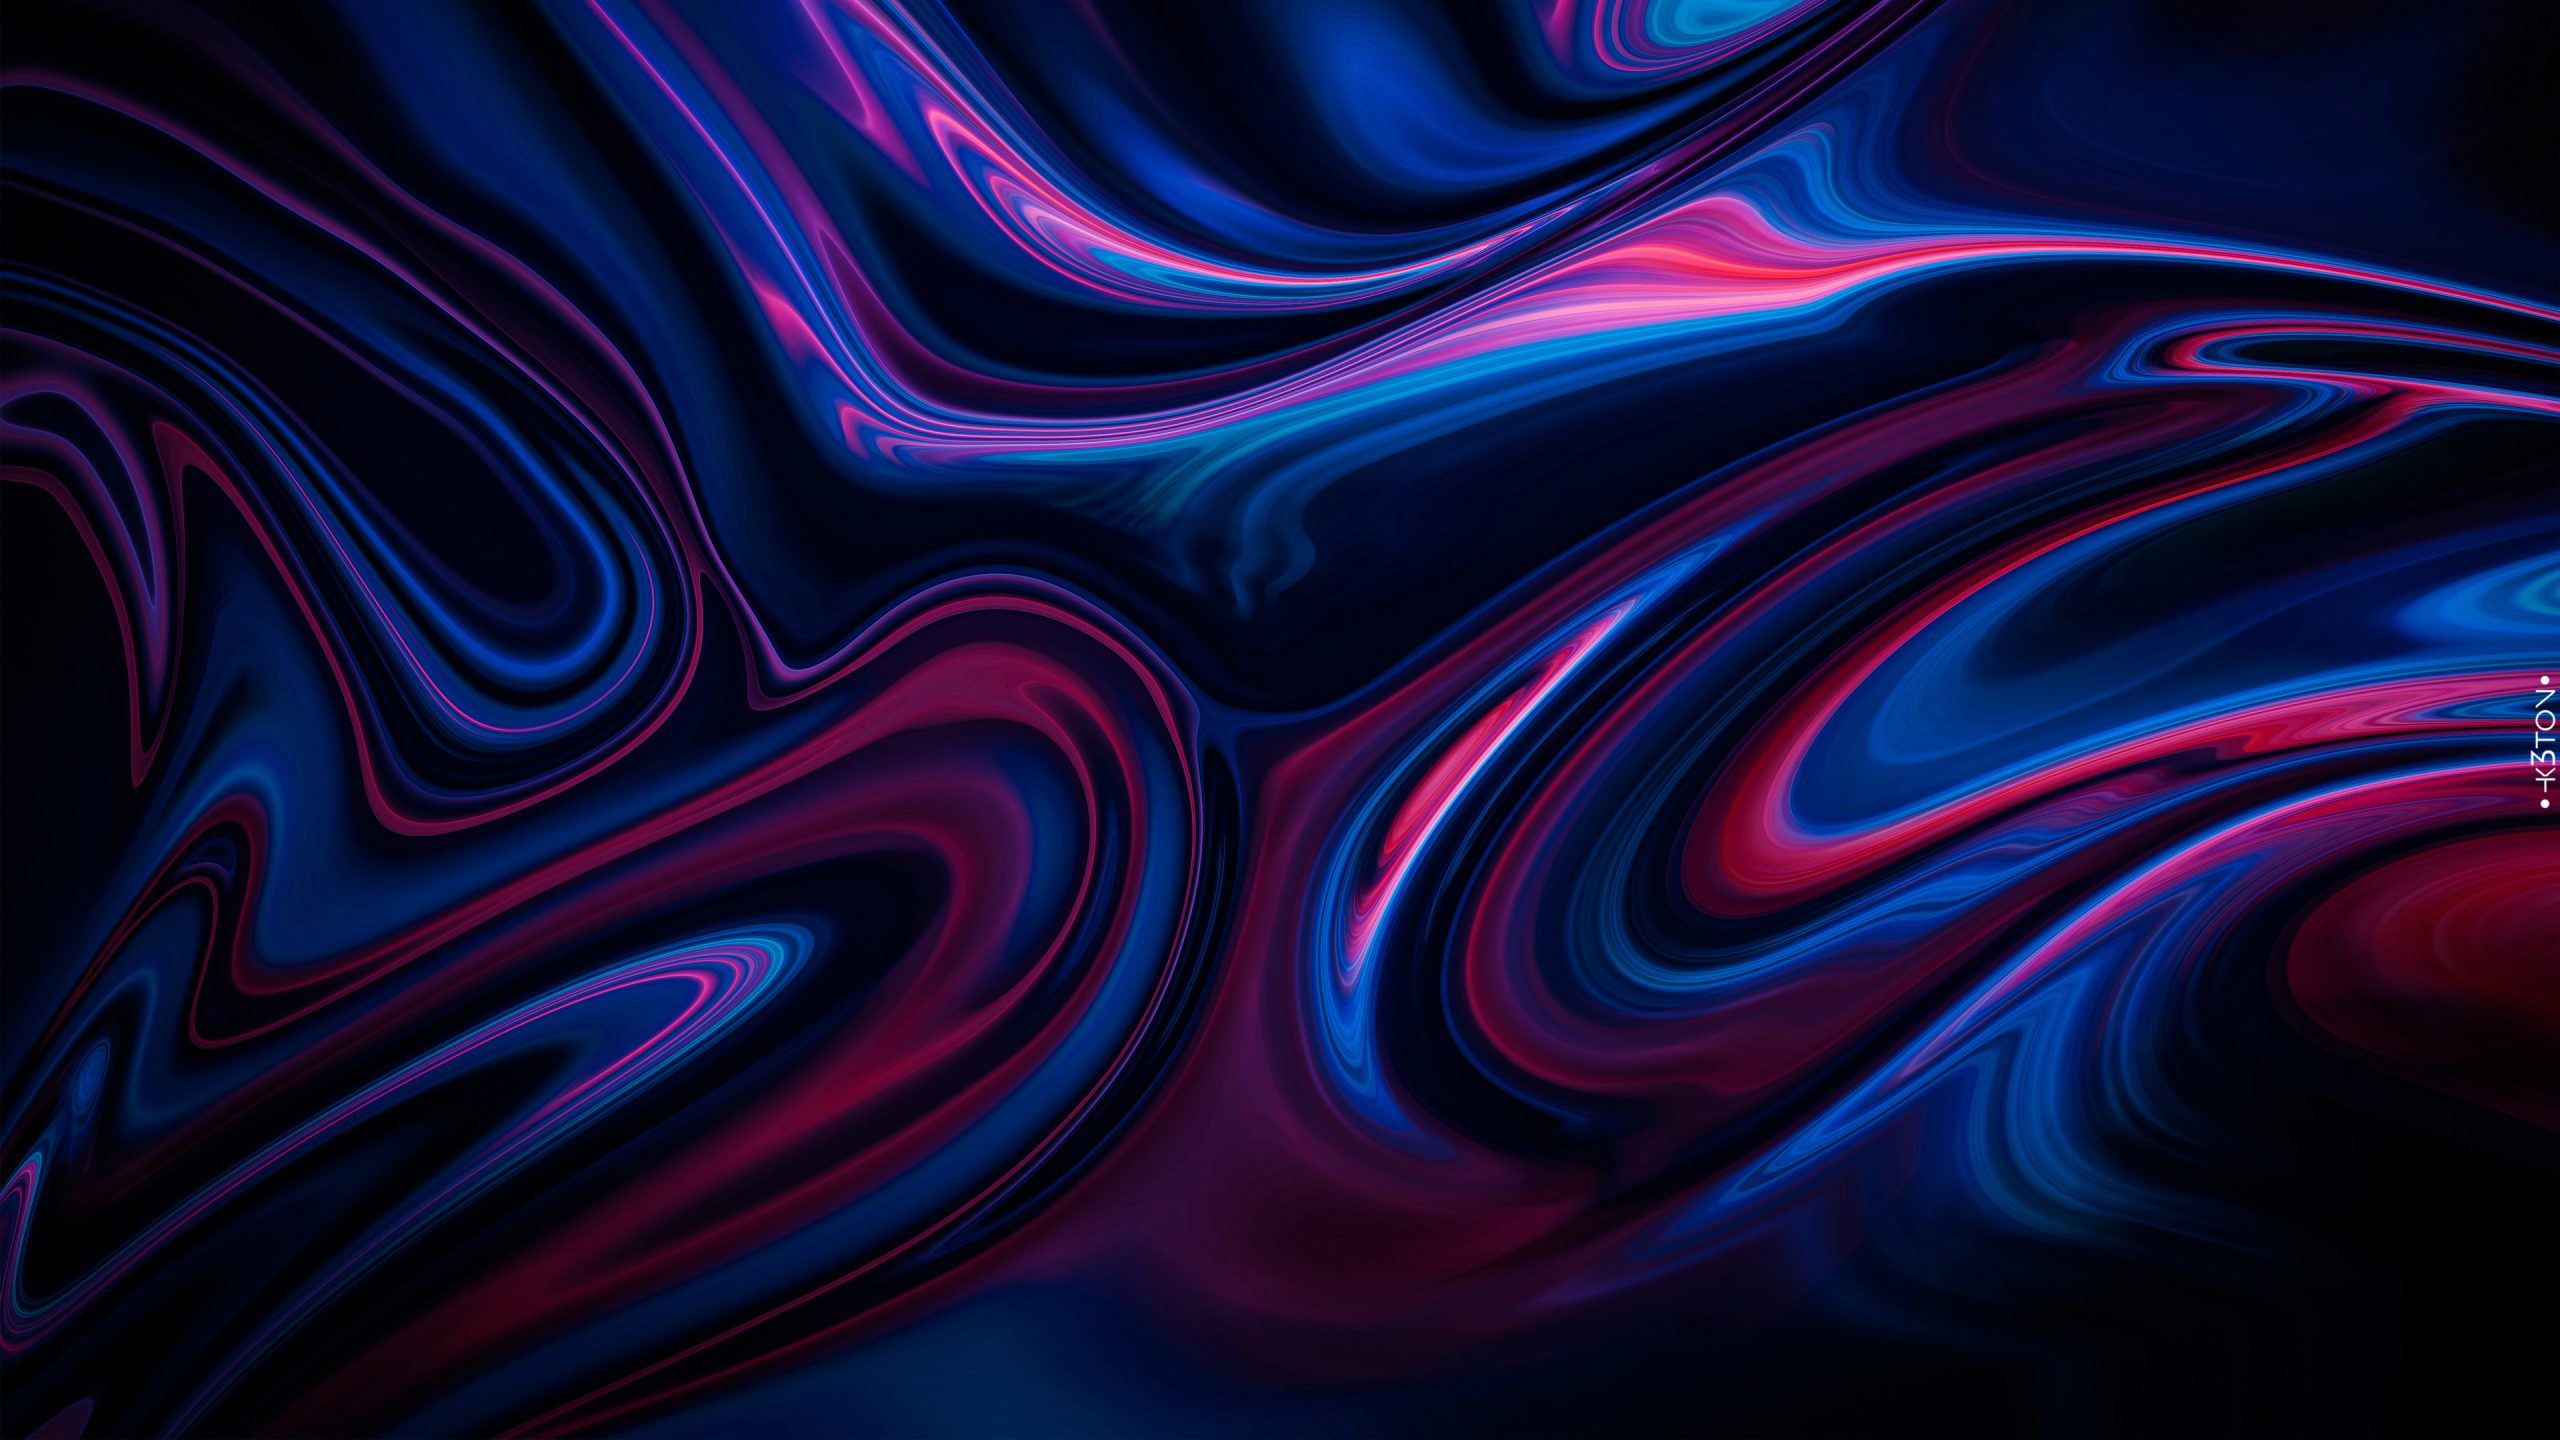 Abstract Design Colorful Pink Blue Purple 4K Wallpaper